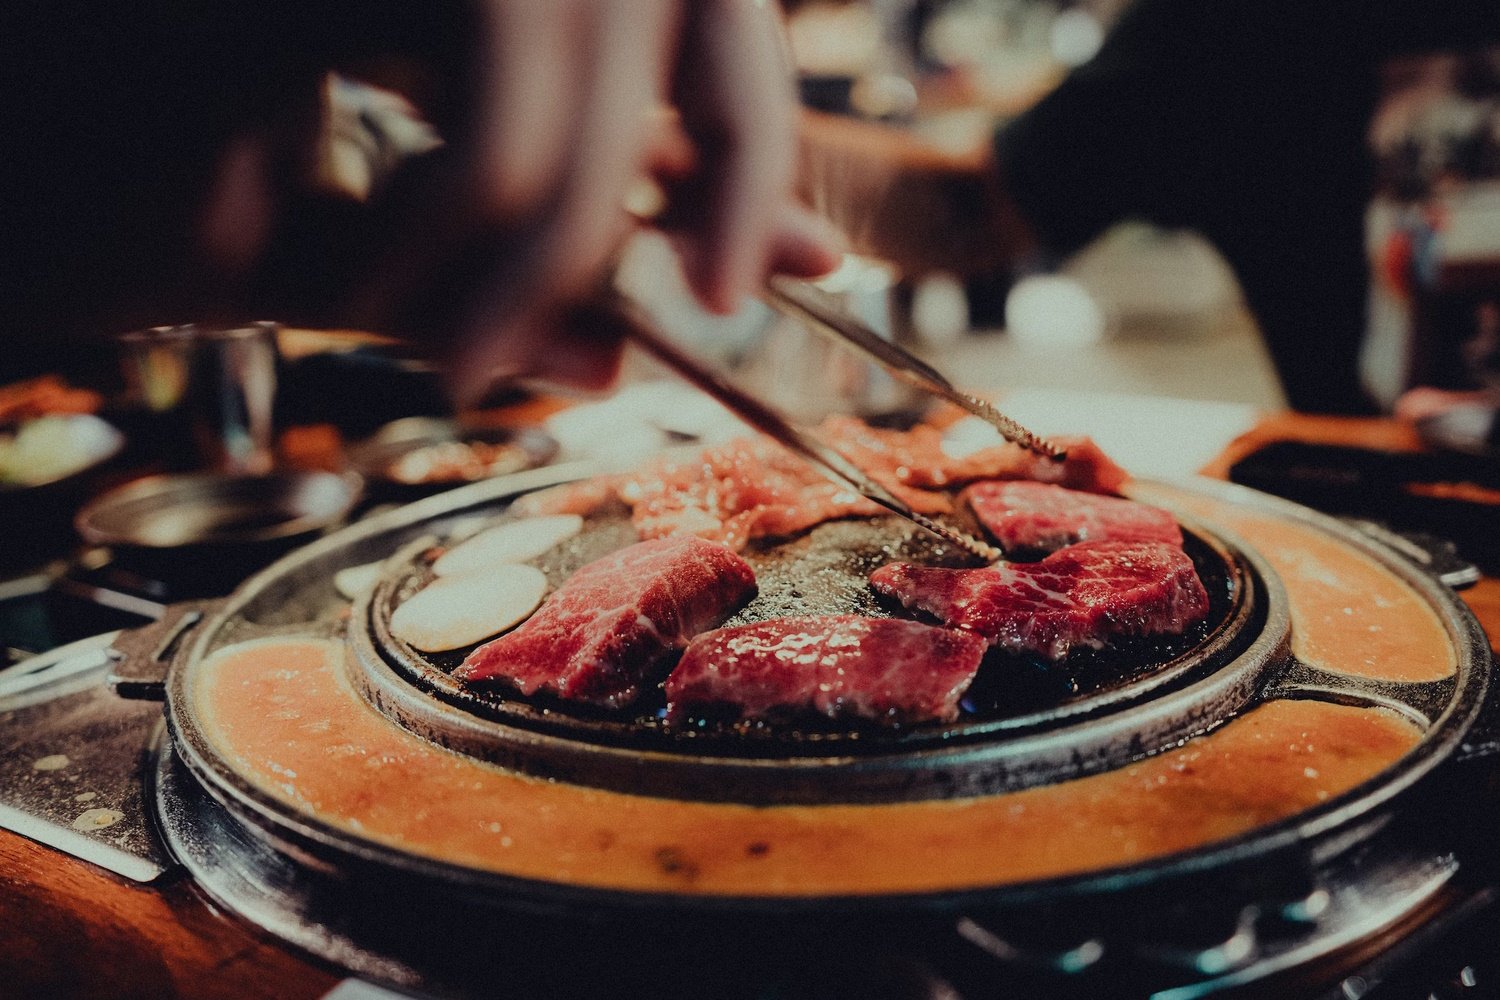 Our top picks for Korean barbecue restaurants in and around San